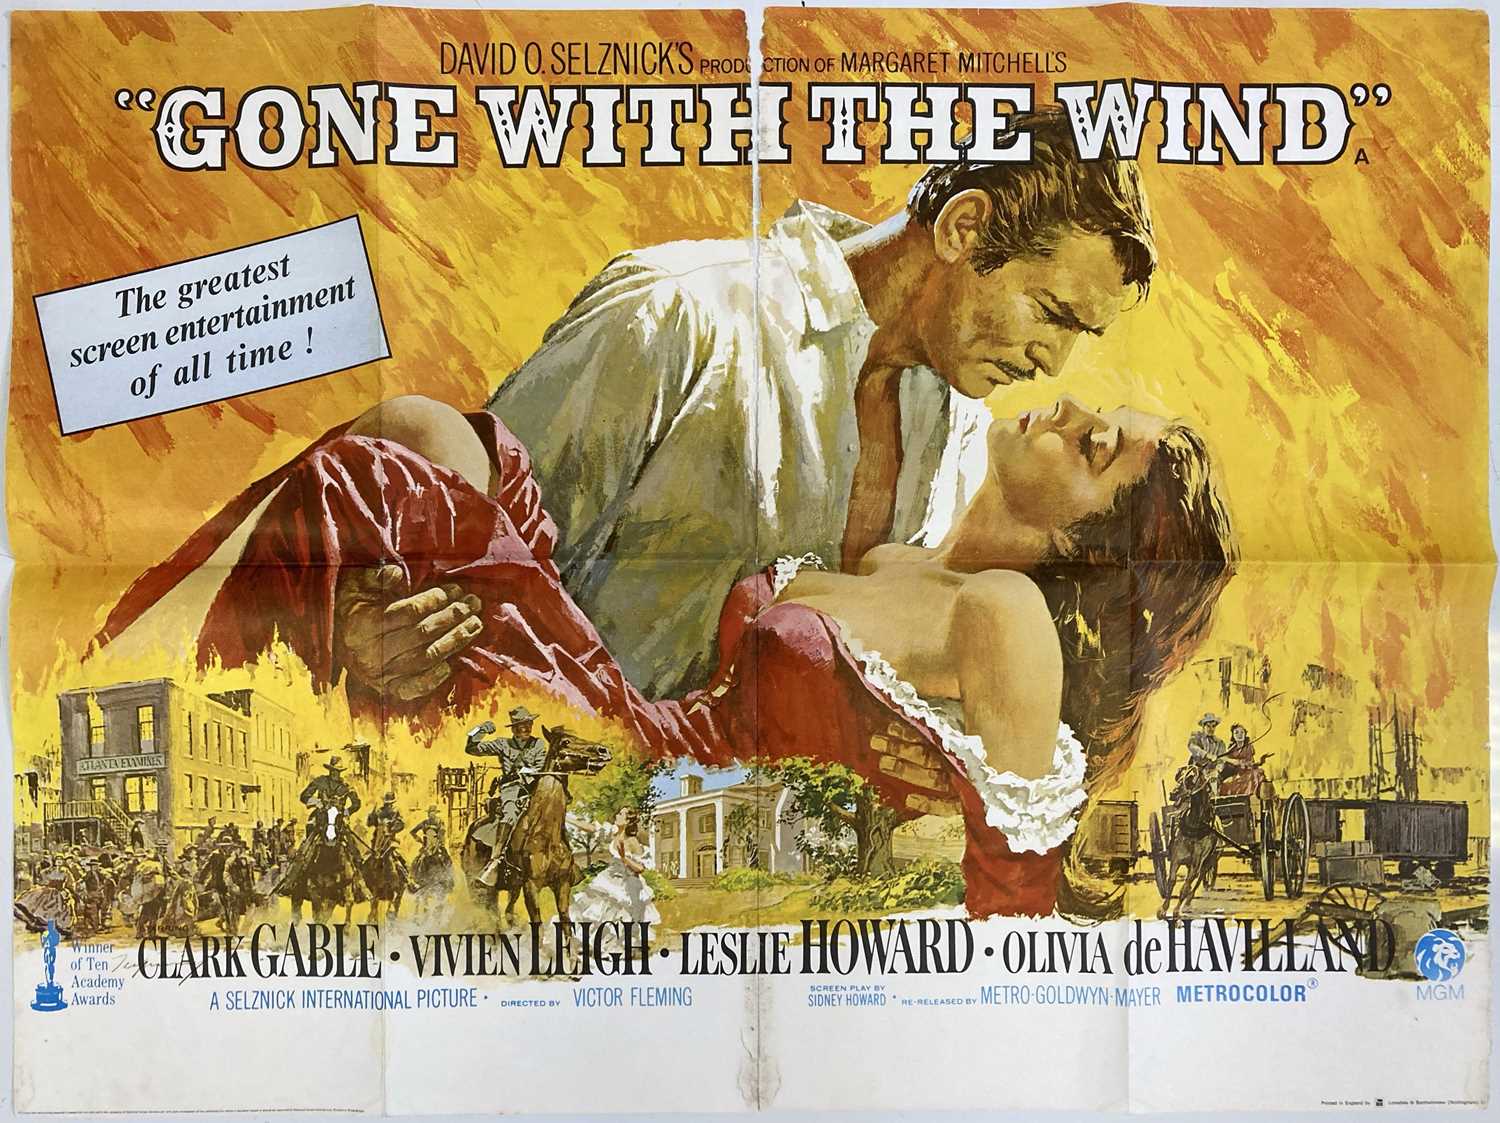 Lot 270 - ORIGINAL GONE WITH THE WIND UK QUAD POSTER.